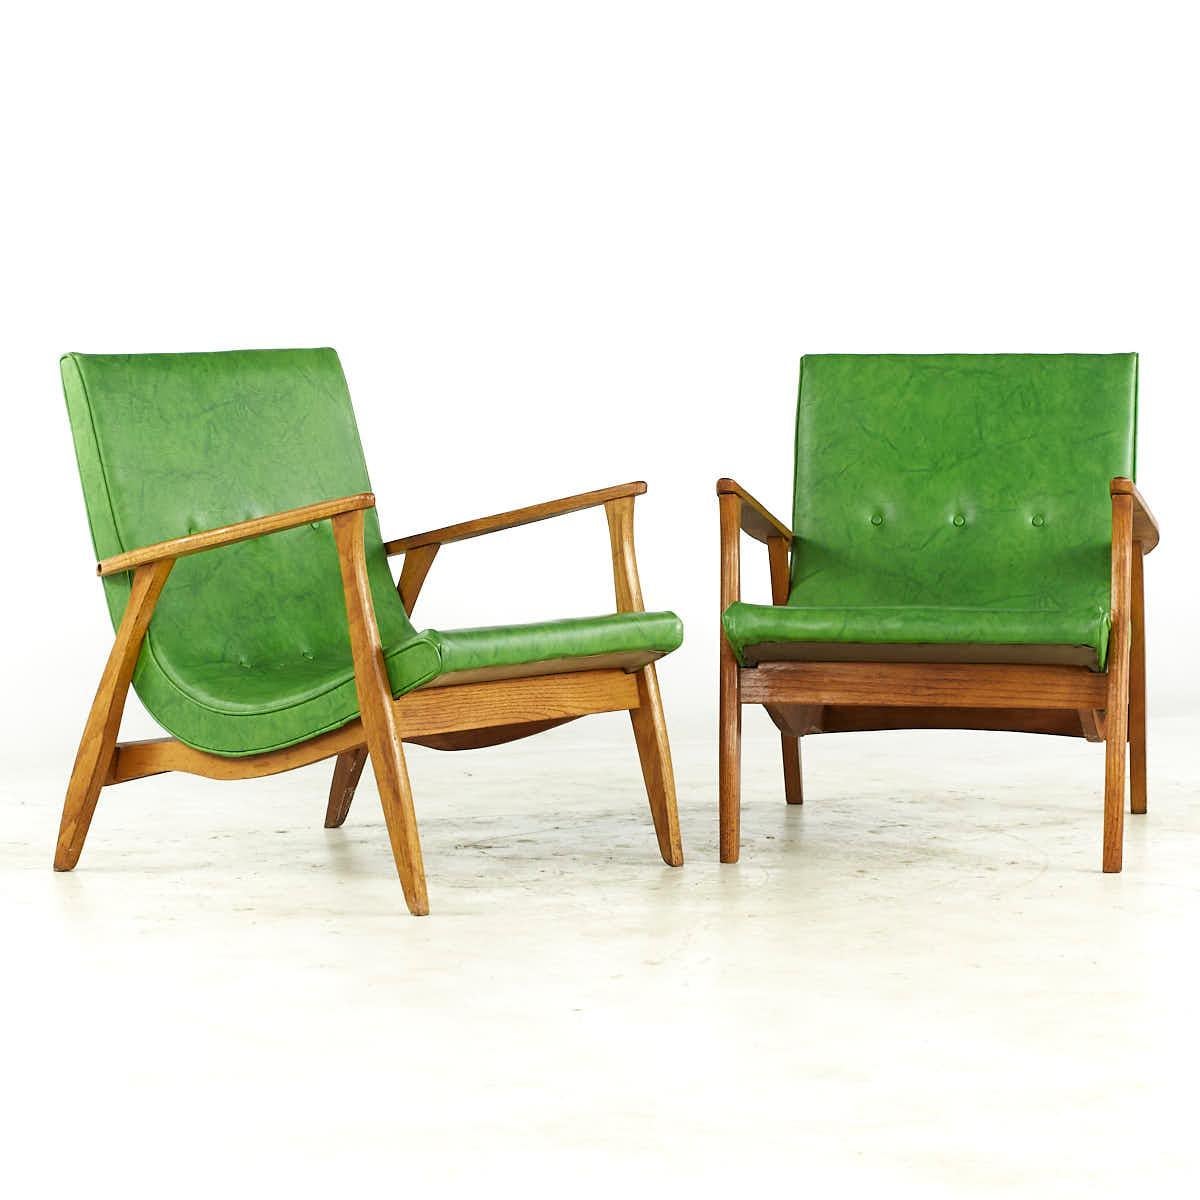 Milo Baughman Mid Century Green Scoop Lounge Chairs – Pair

This chair measures: 25.25 wide x 25.75 deep x 31.5 high, with a seat height of 17 and arm height/chair clearance 24.5 inches

All pieces of furniture can be had in what we call restored